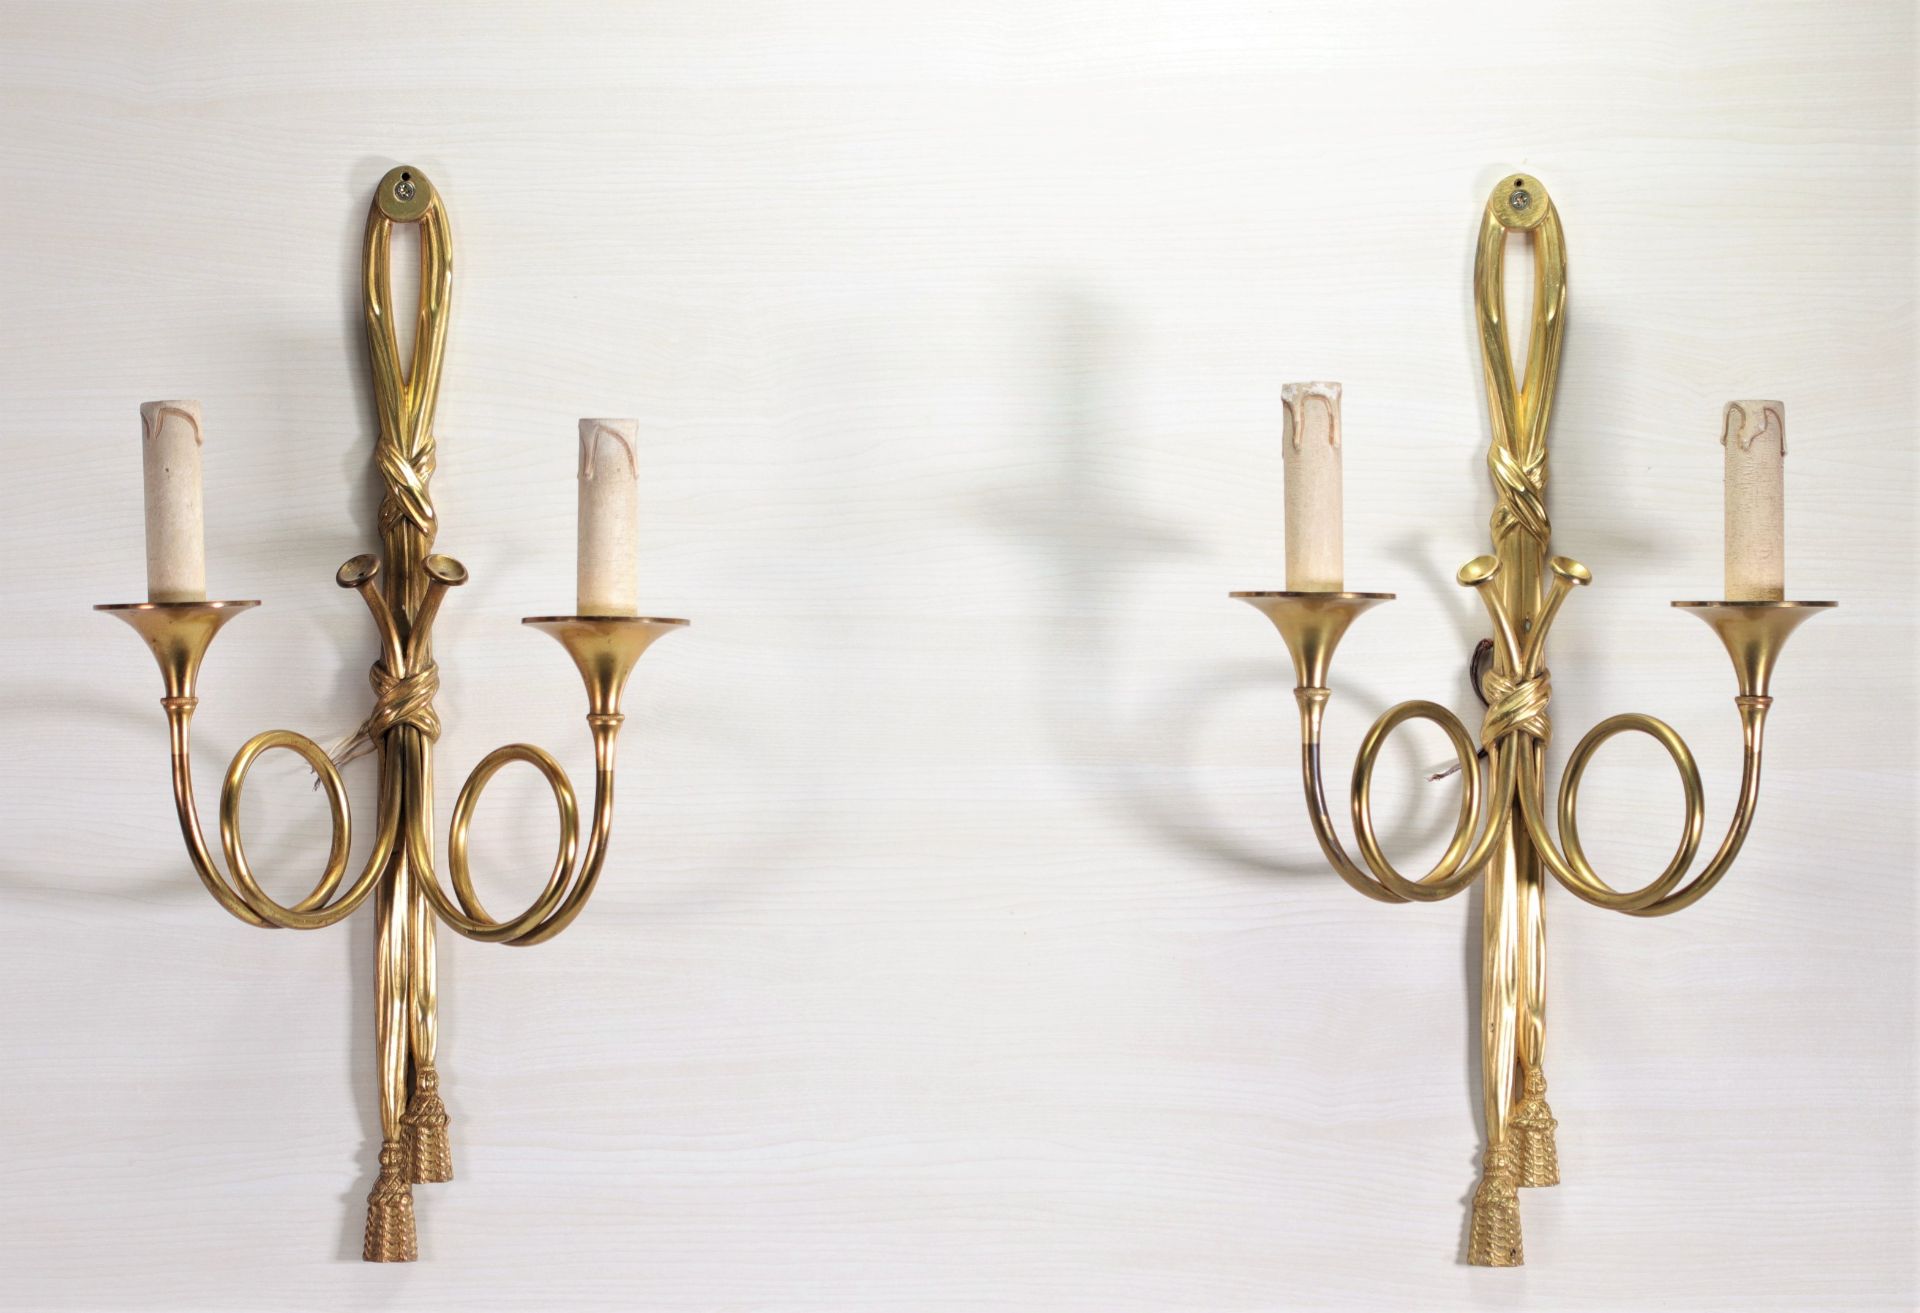 Series of four gilt bronze sconces forming knots - Image 2 of 3